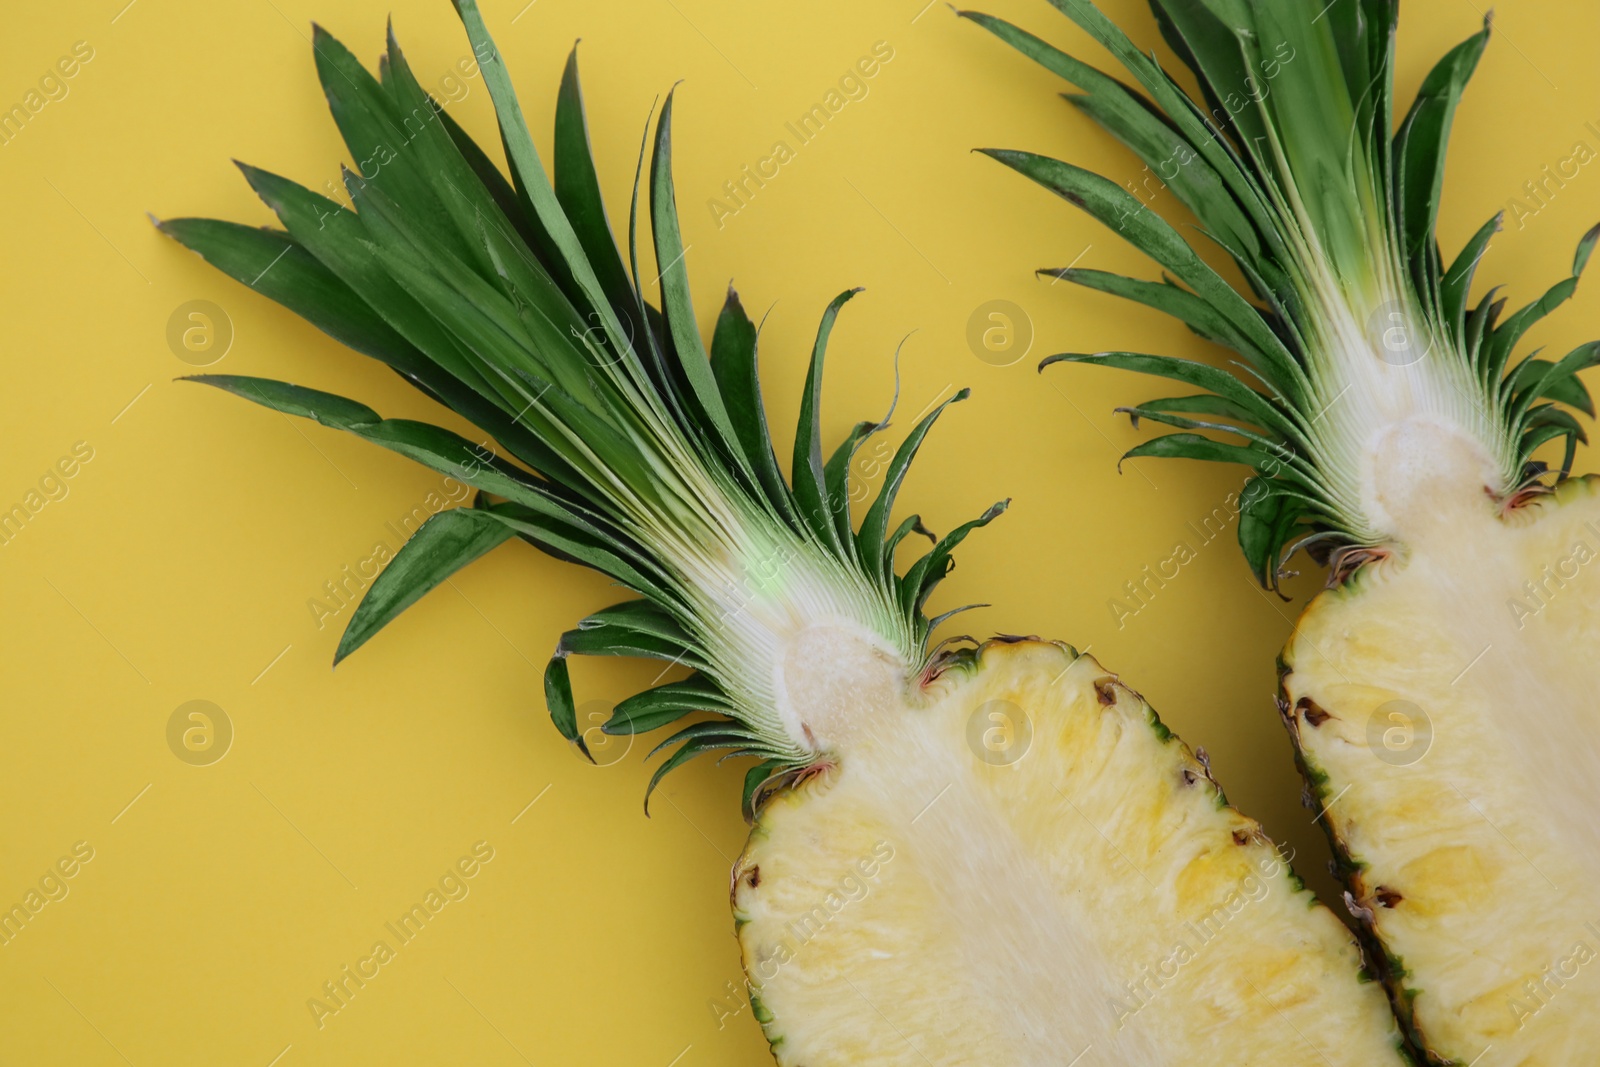 Photo of Halves of ripe pineapple on yellow background, flat lay